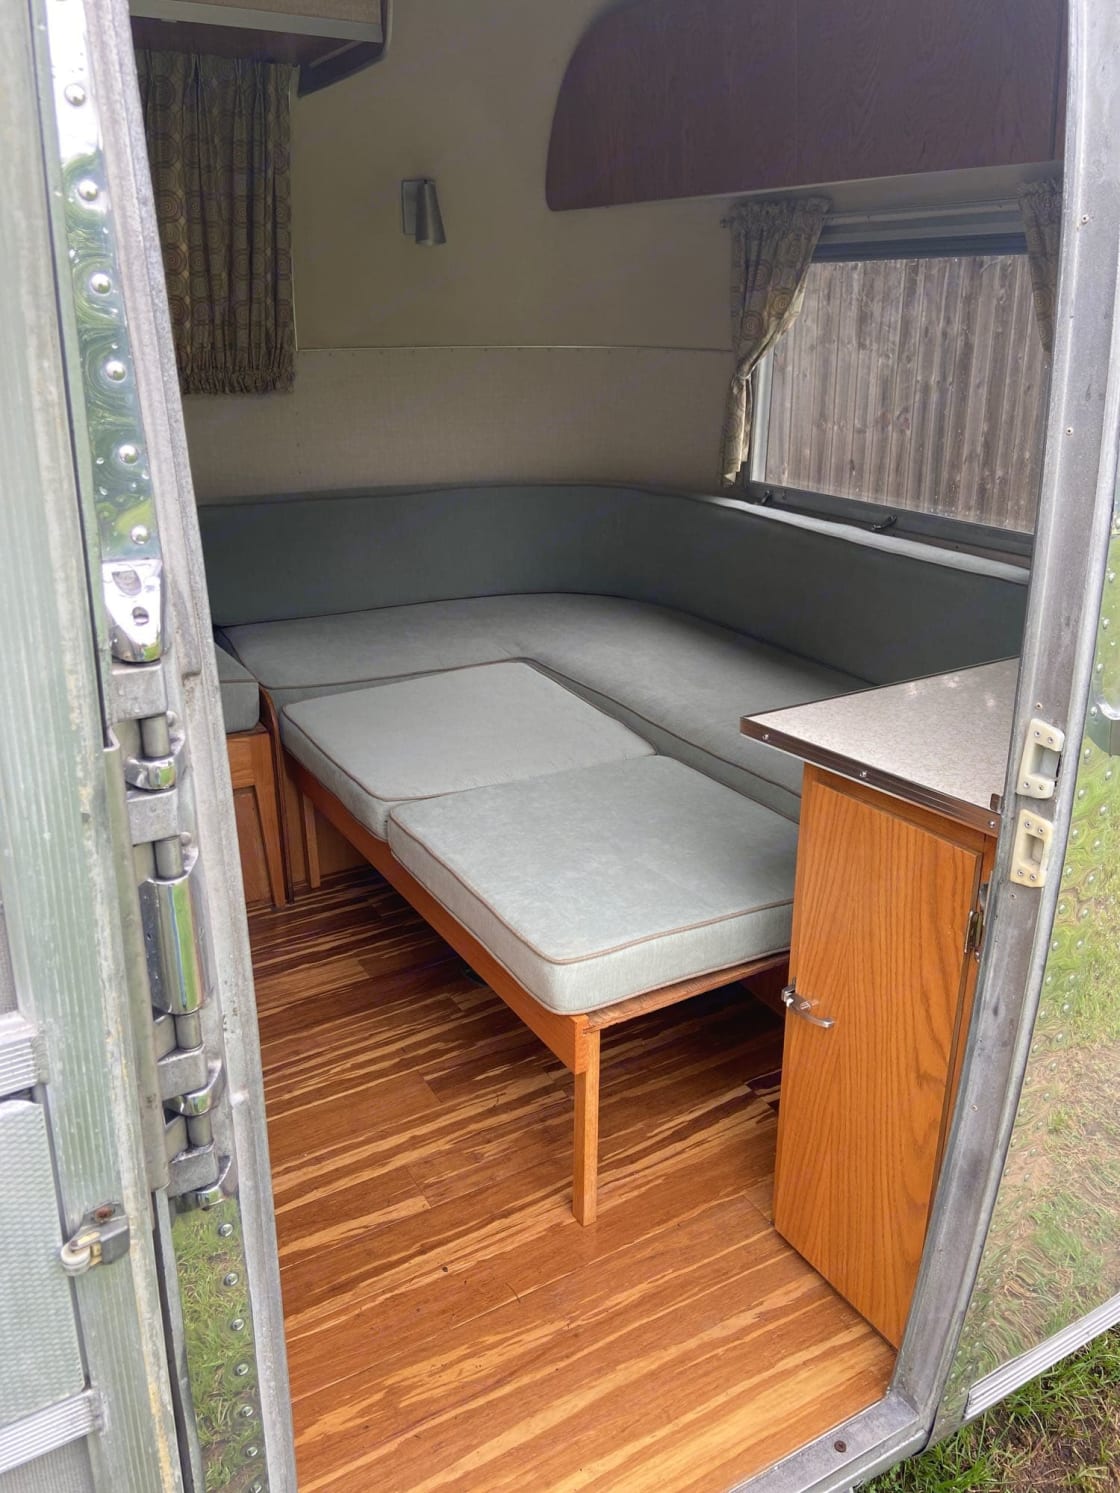 Dinette converted if more sleeping area needed.